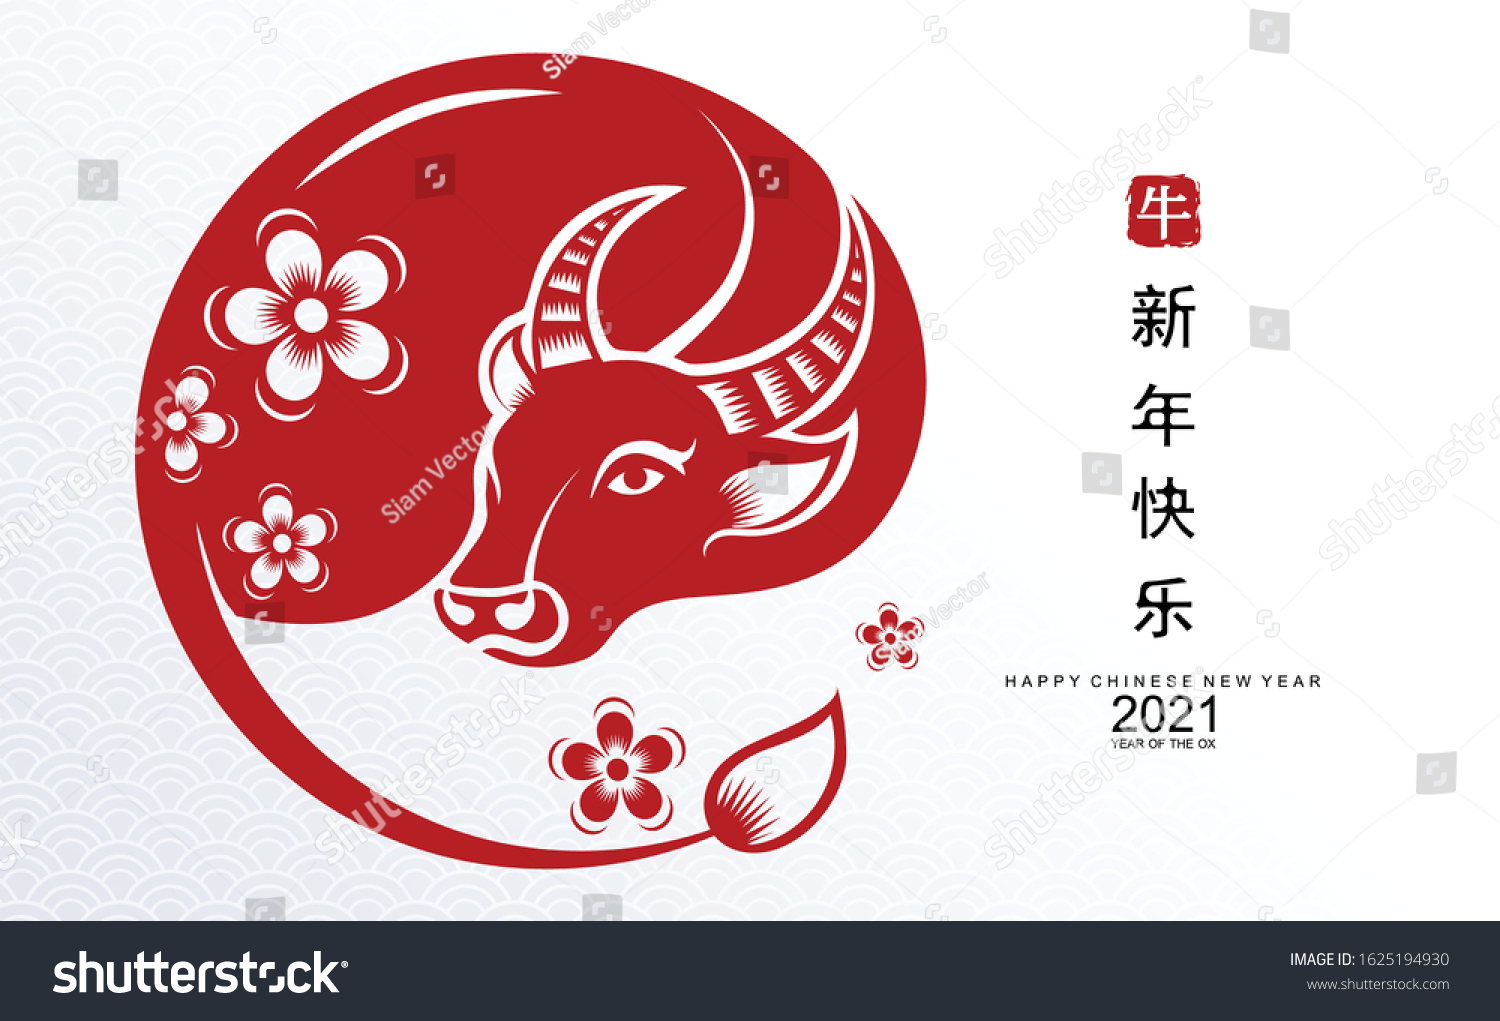 Chinese New Year 2021 Year Ox Stock Vector Royalty Free 1625194930 Shutterstock